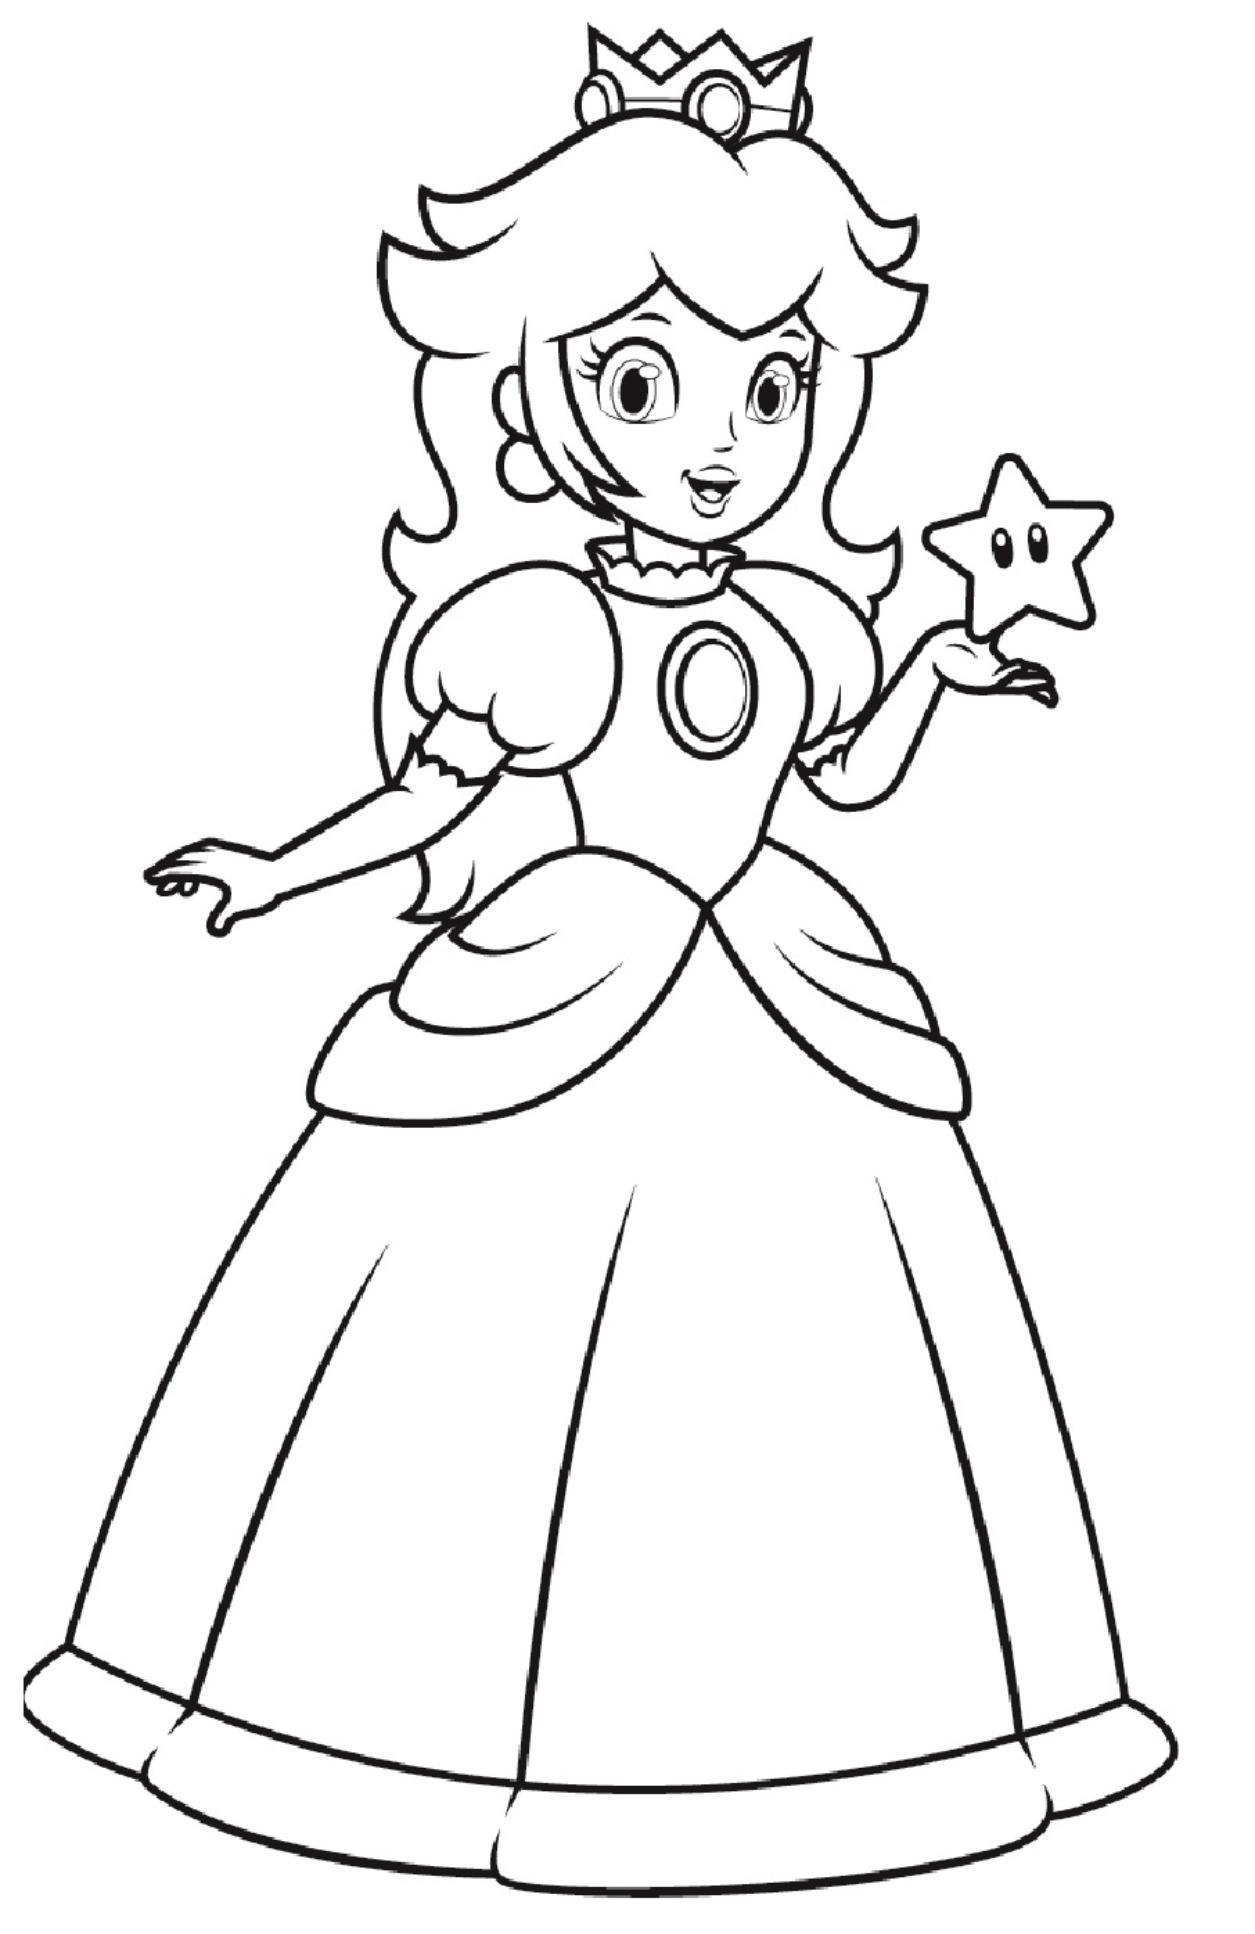 Princess Peach Coloring Pages To Download And Print F - vrogue.co